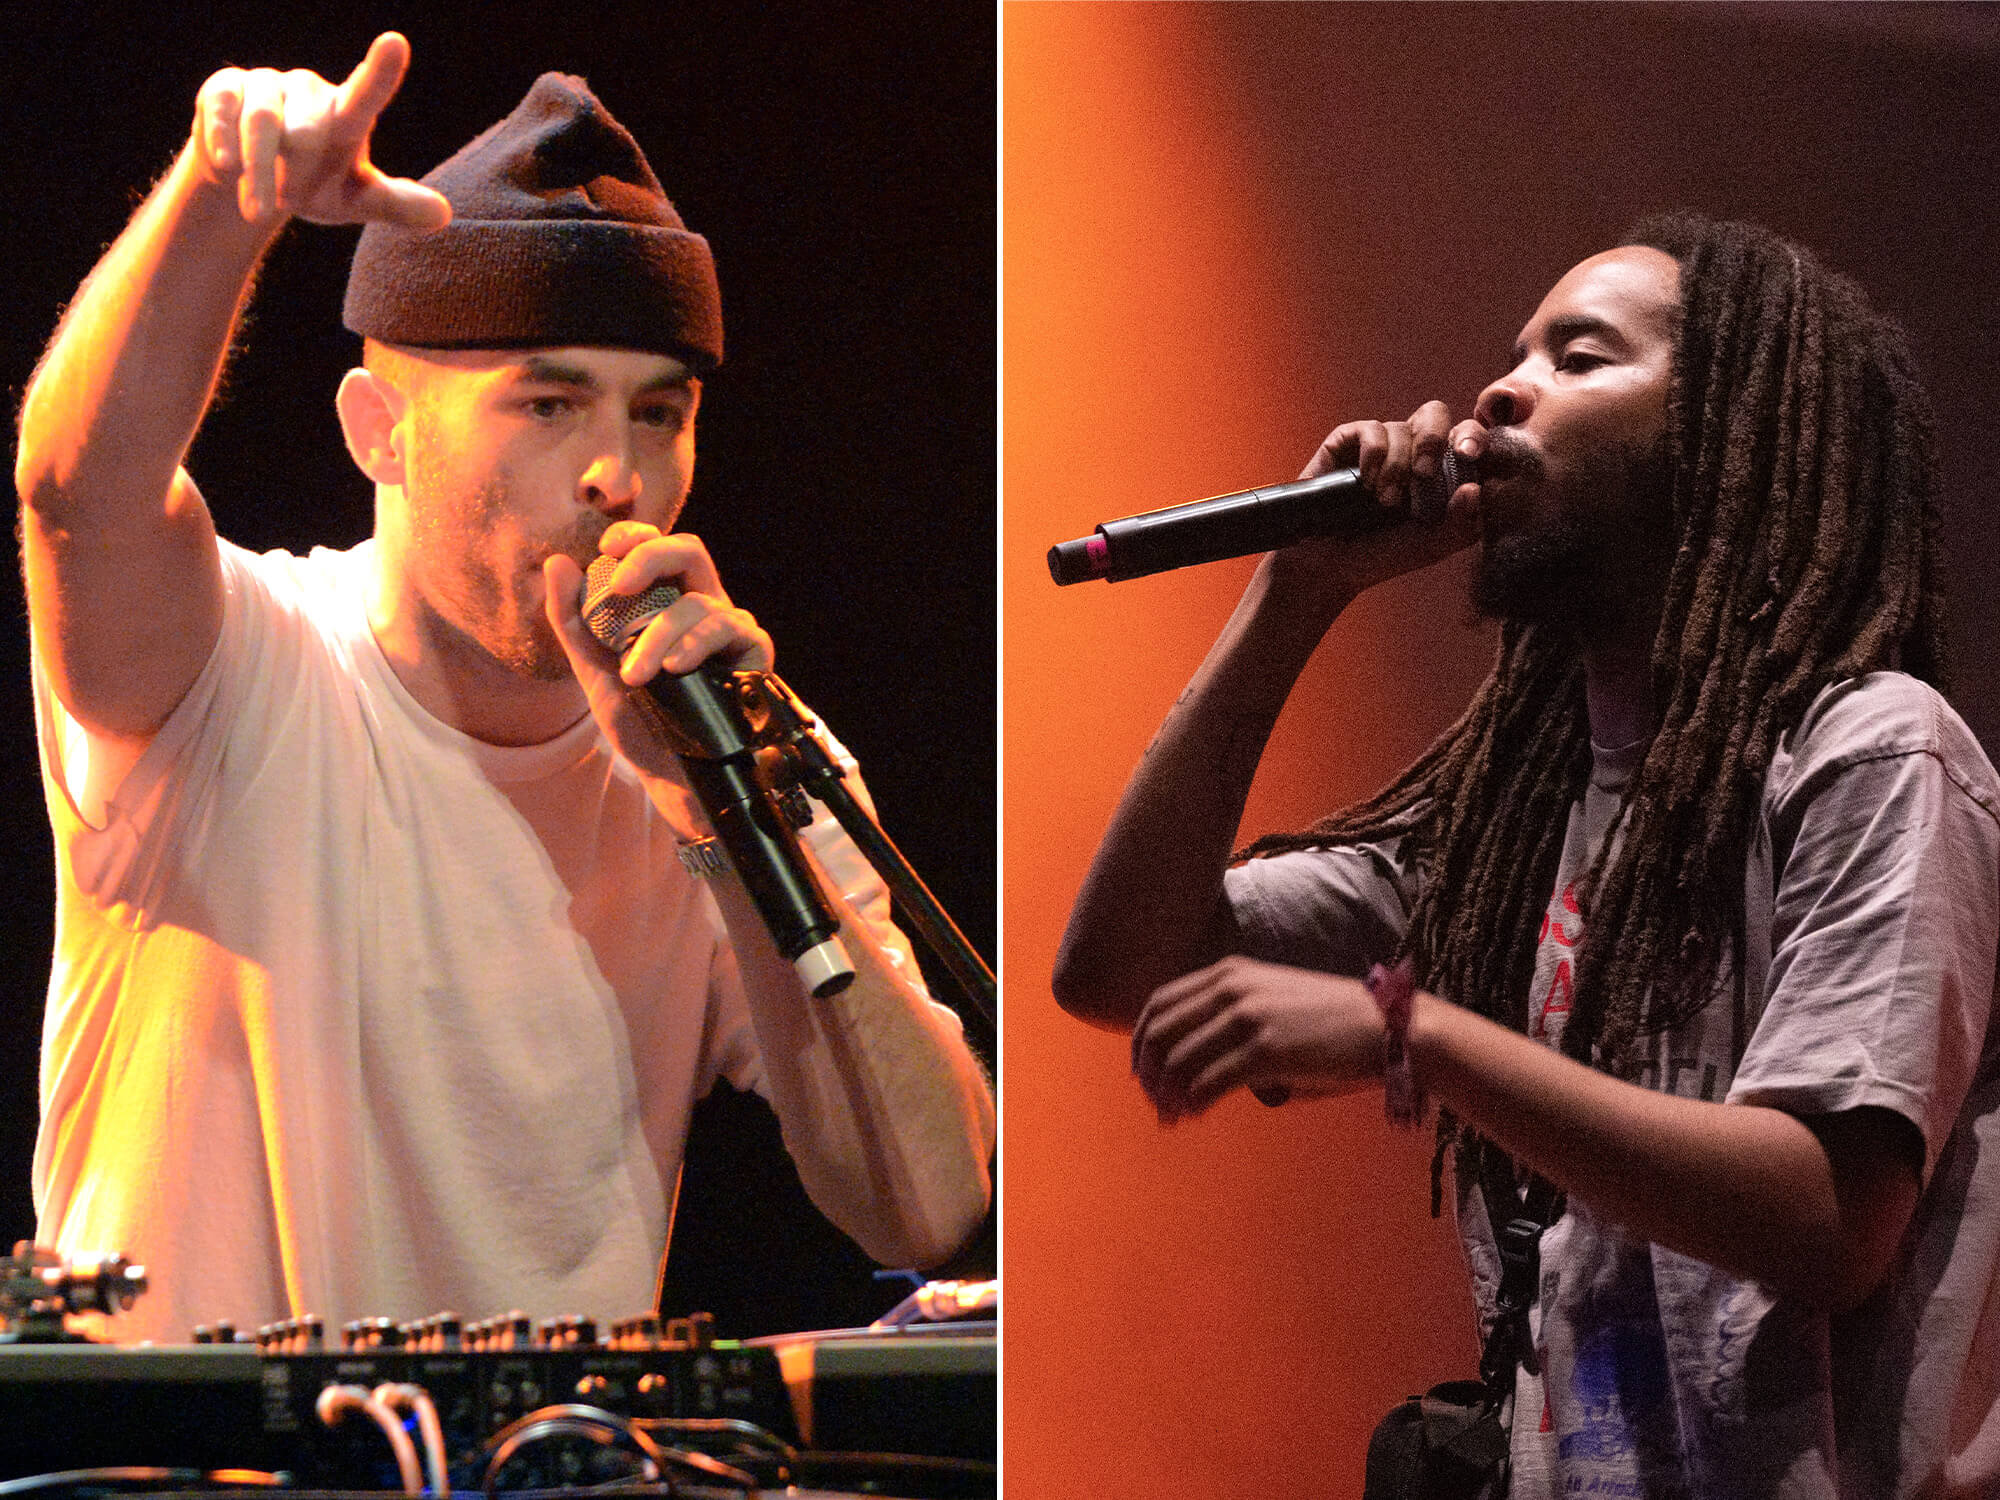 The Alchemist (left) holding a mic in one hand and his other hand up in the air. Earl Sweatshirt (right) on stage singing into a mic before an orange background.